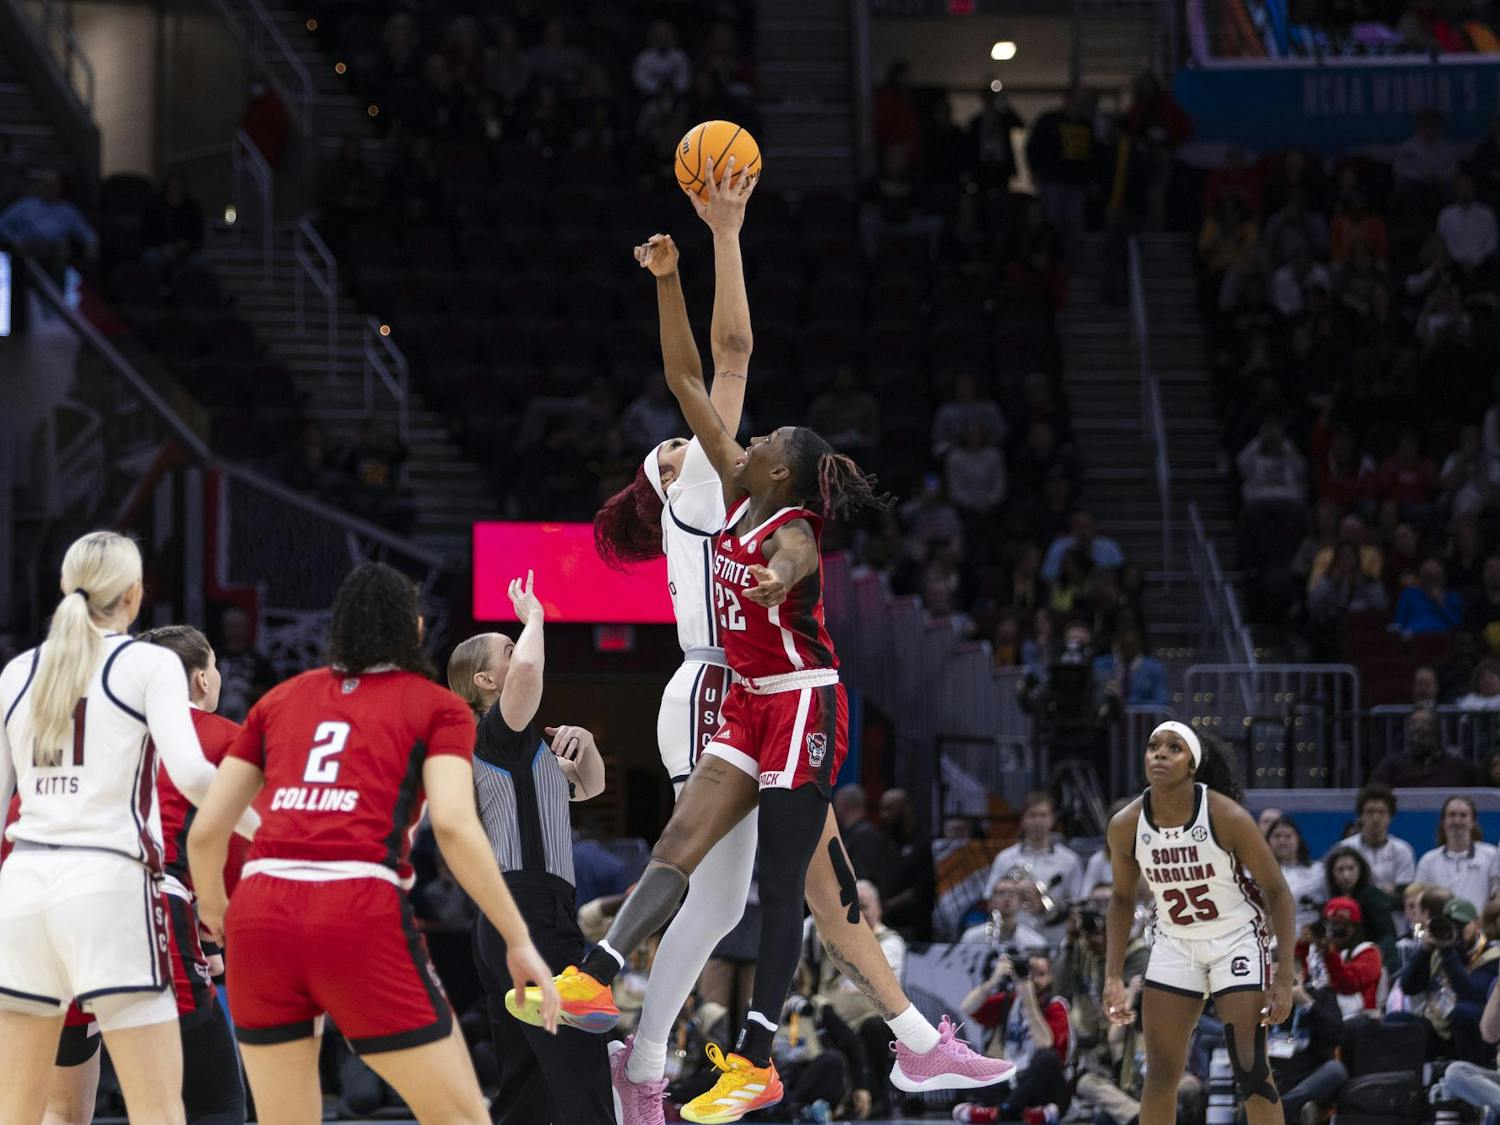 The South Carolina Gamecocks delivered a decisive victory to the North Carolina State Wolfpack in the first of two semifinal games at the 2024 Women’s Final Four matchup on April 5, 2024. The Gamecocks defeated the Wolf Pack 78-59 at Rocket Mortgage FieldHouse in Cleveland, OH.